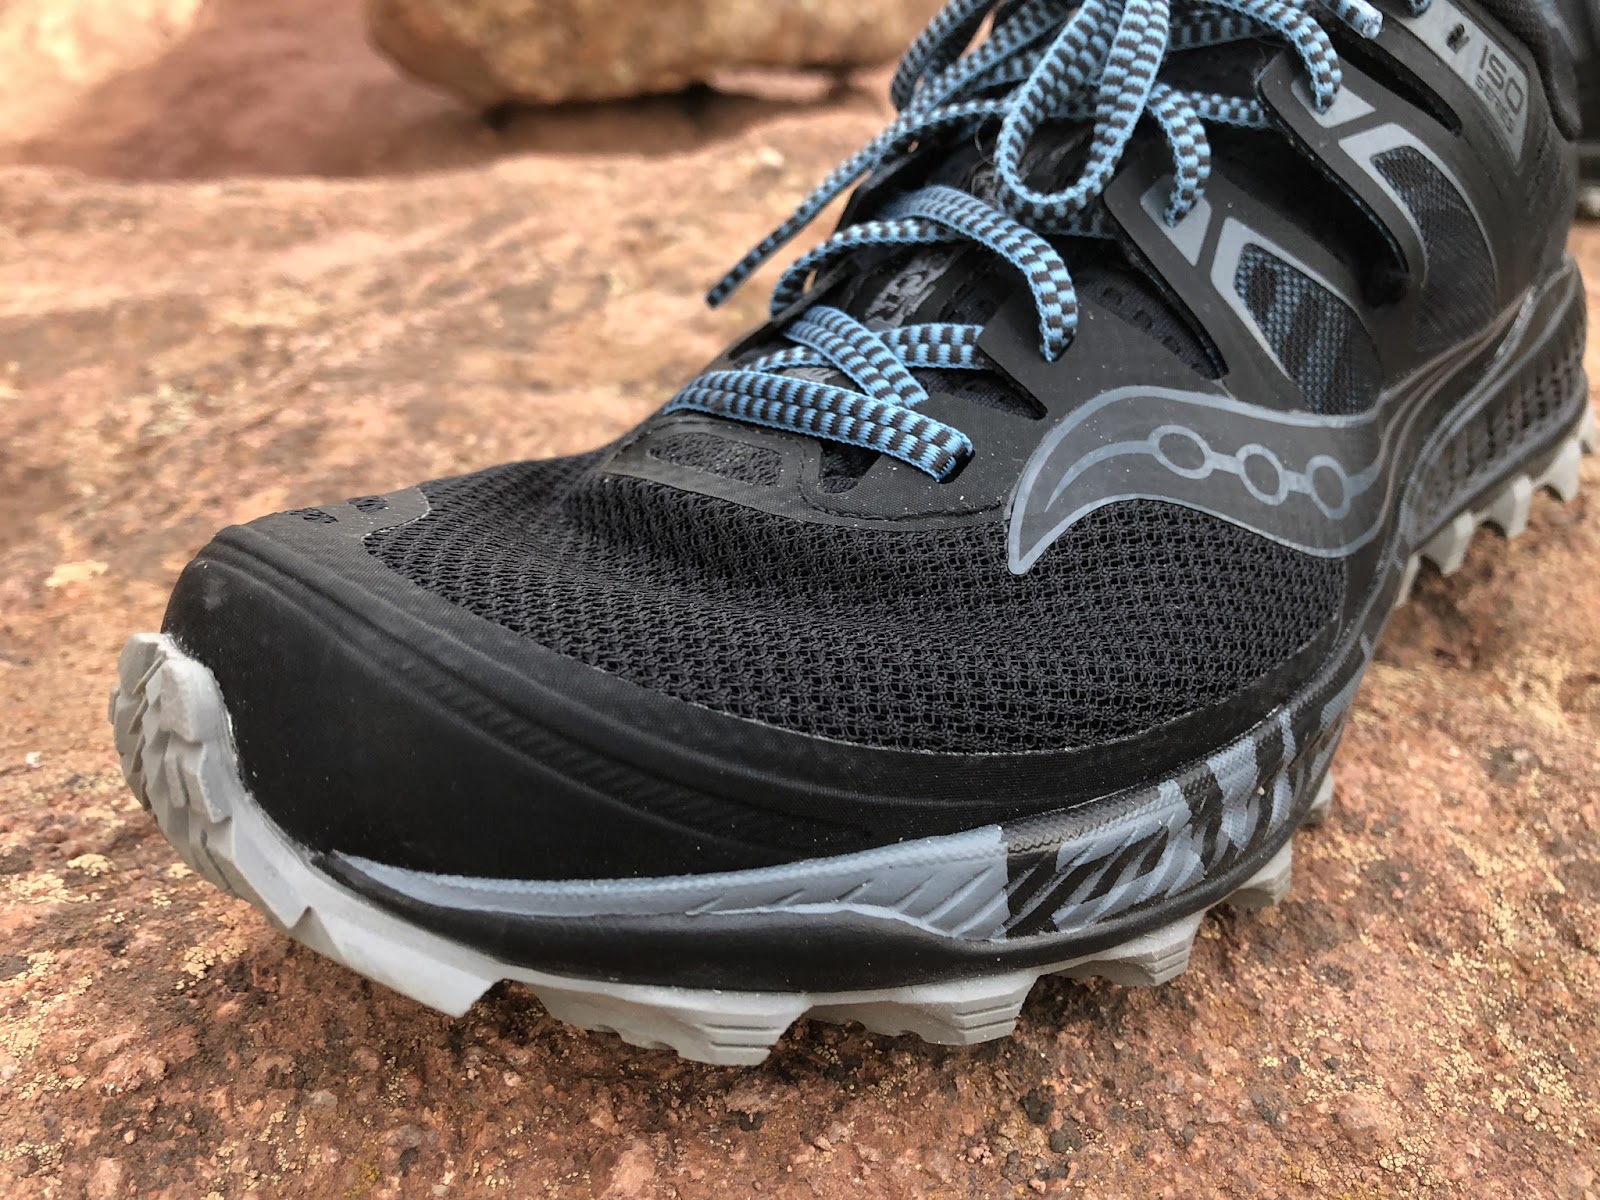 Road Trail Run: Saucony Peregrine ISO Review: Regardless of Terrain-  Confidence Inspiring, Secure & Comfortable